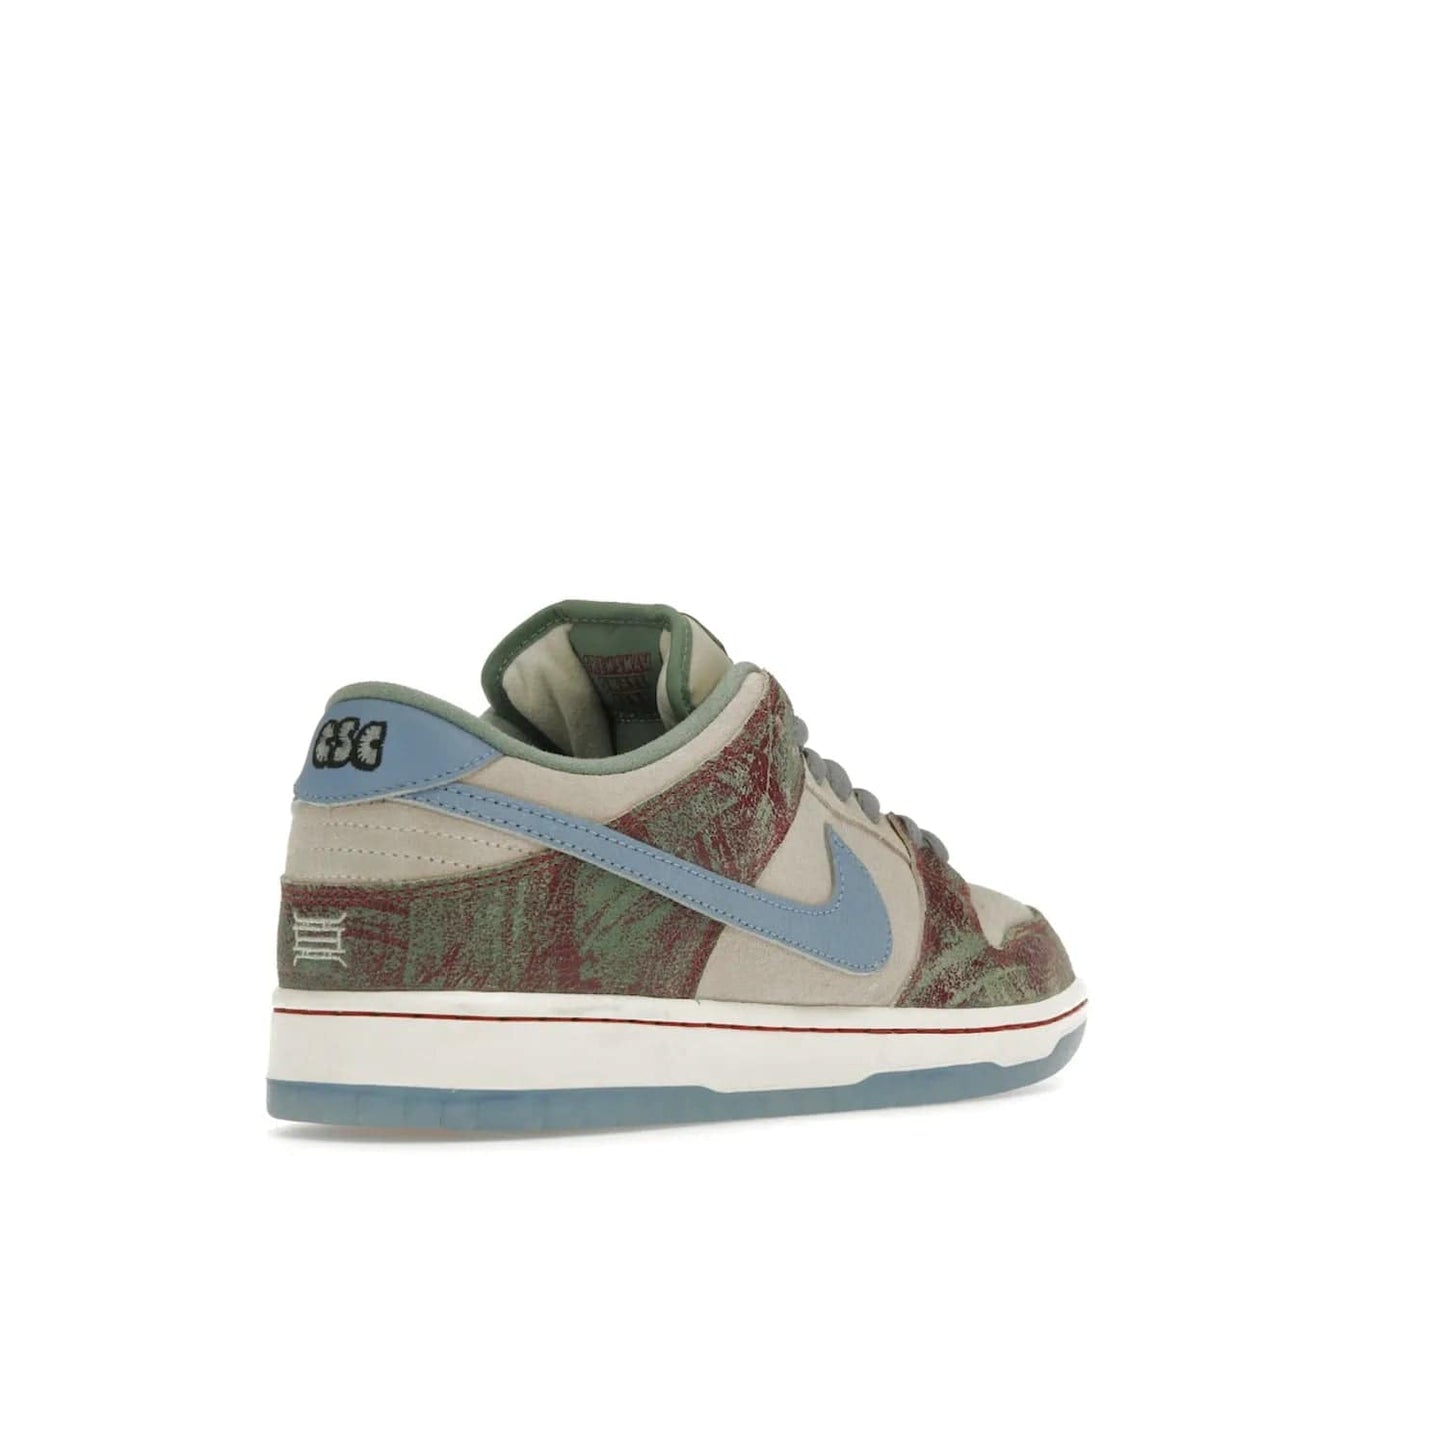 Nike SB Dunk Low Crenshaw Skate Club - Image 32 - Only at www.BallersClubKickz.com - Introducing the Nike SB Dunk Low Crenshaw Skate Club! Classic skate shoes with Sail and Light Blue upper, Cedar accents, padded collars and superior grip for comfortable, stable performance and style. Ideal for any skate session.